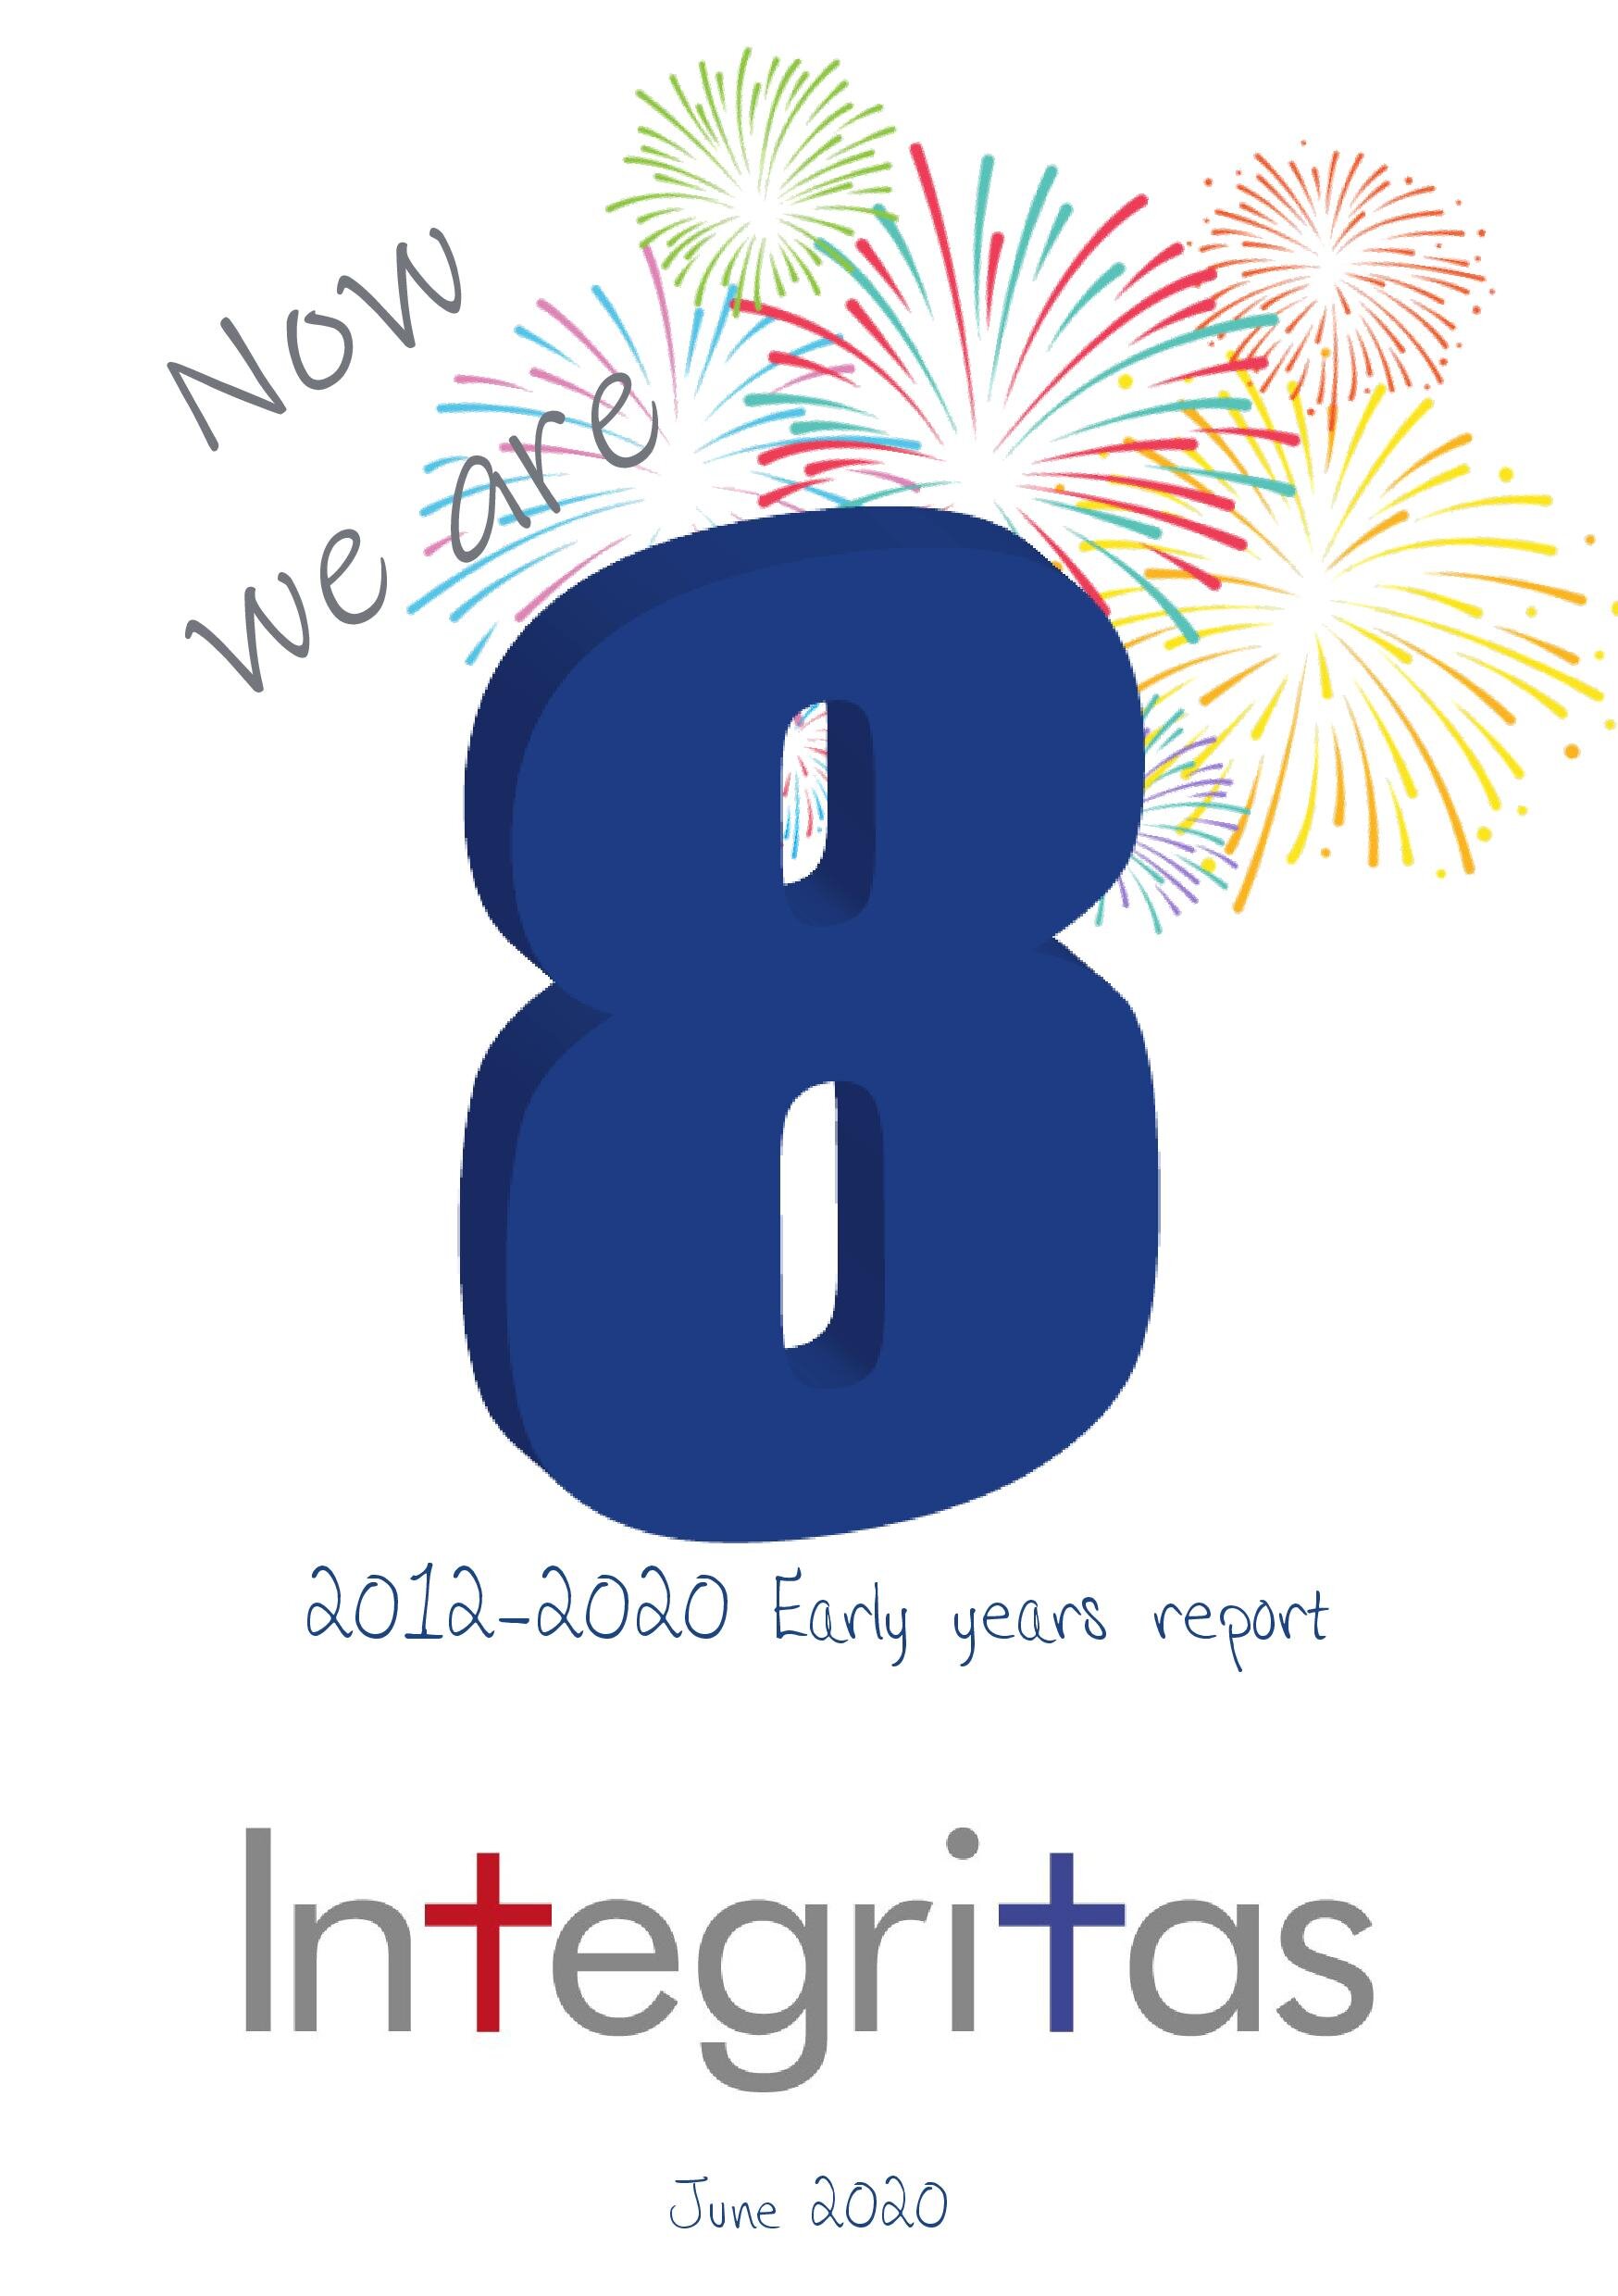 Now we are 8 - Integritas  2012-2020 Early Years Report-page-001.jpg